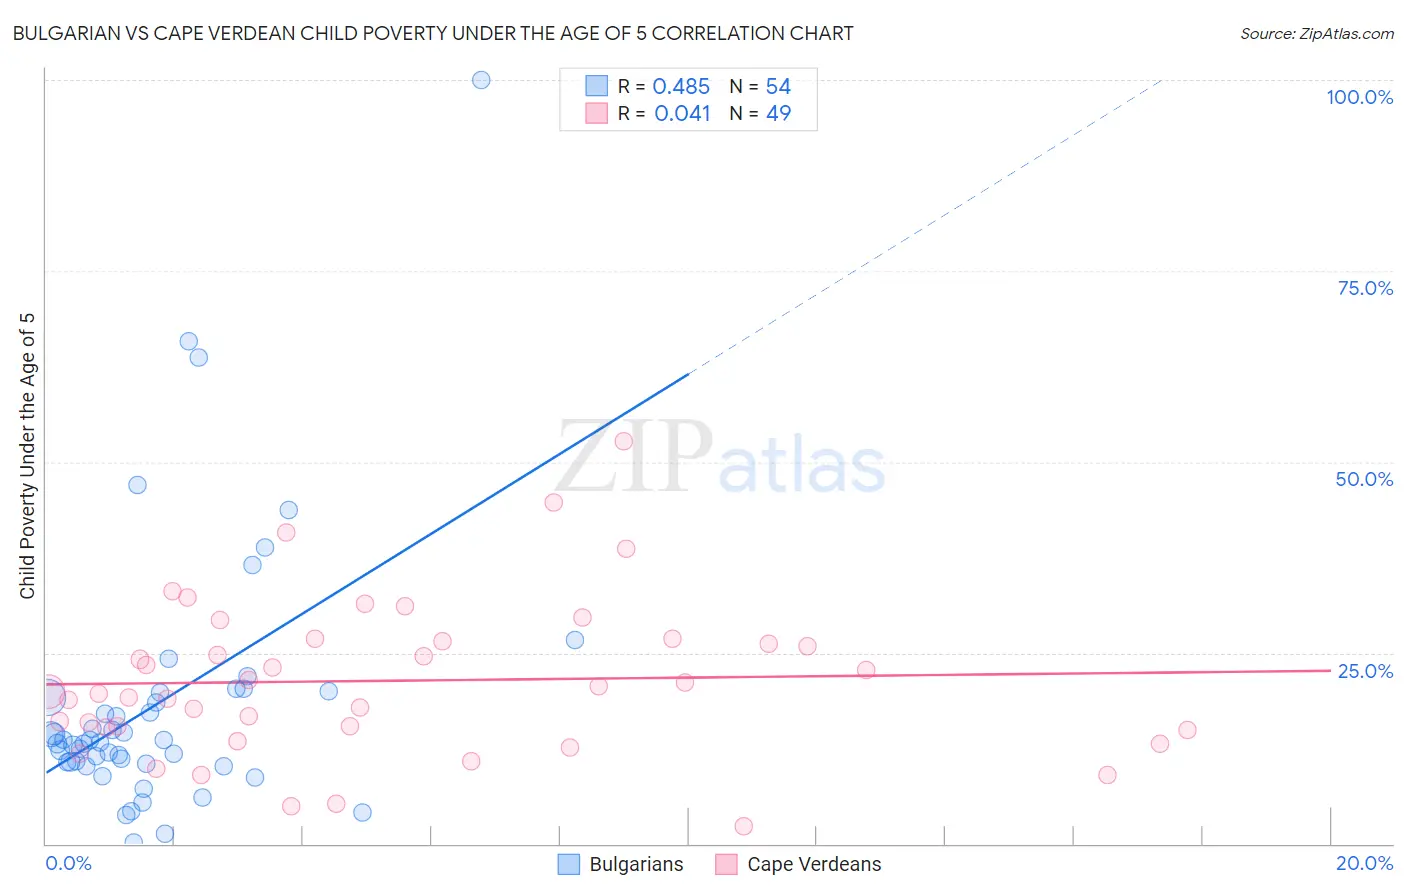 Bulgarian vs Cape Verdean Child Poverty Under the Age of 5